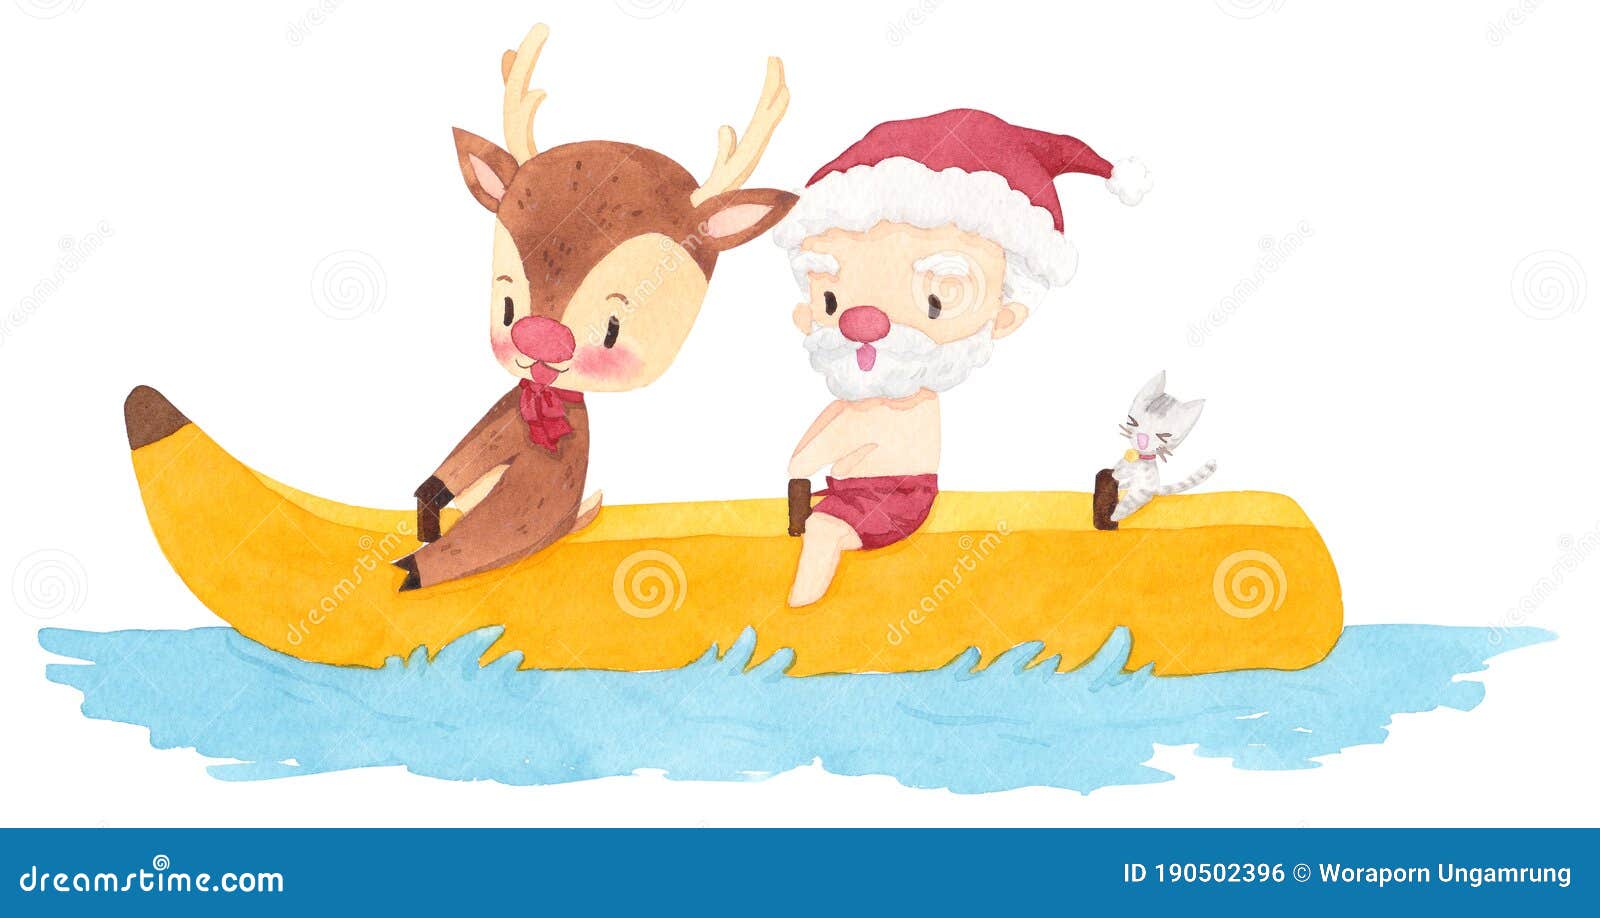 Santa Claus, Deer and Cat on a Banana Boat. Cute Cartoon Character Design  on White Background. Christmas in June. Stock Illustration - Illustration  of cartoon, claus: 190502396